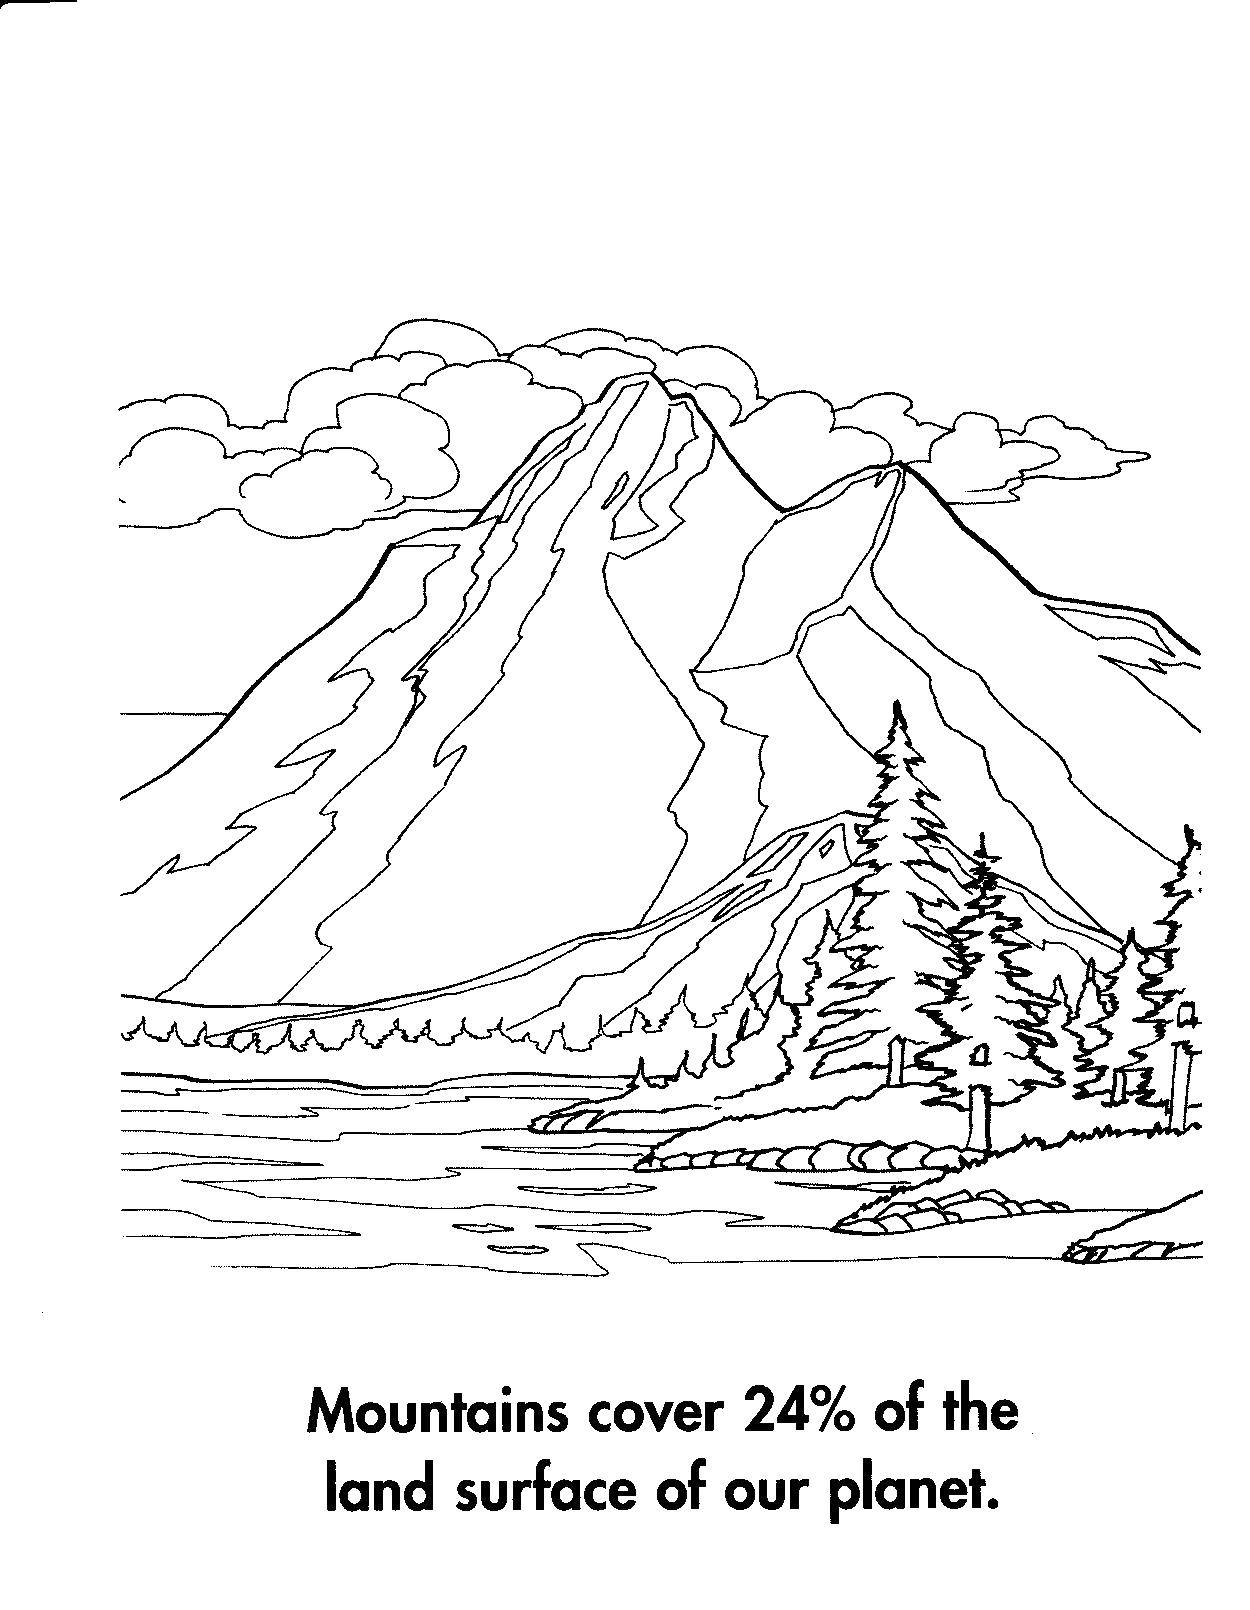 Coloring The rock is 24% of the land on the planet. Category Nature. Tags:  Nature, forest, mountains, river.